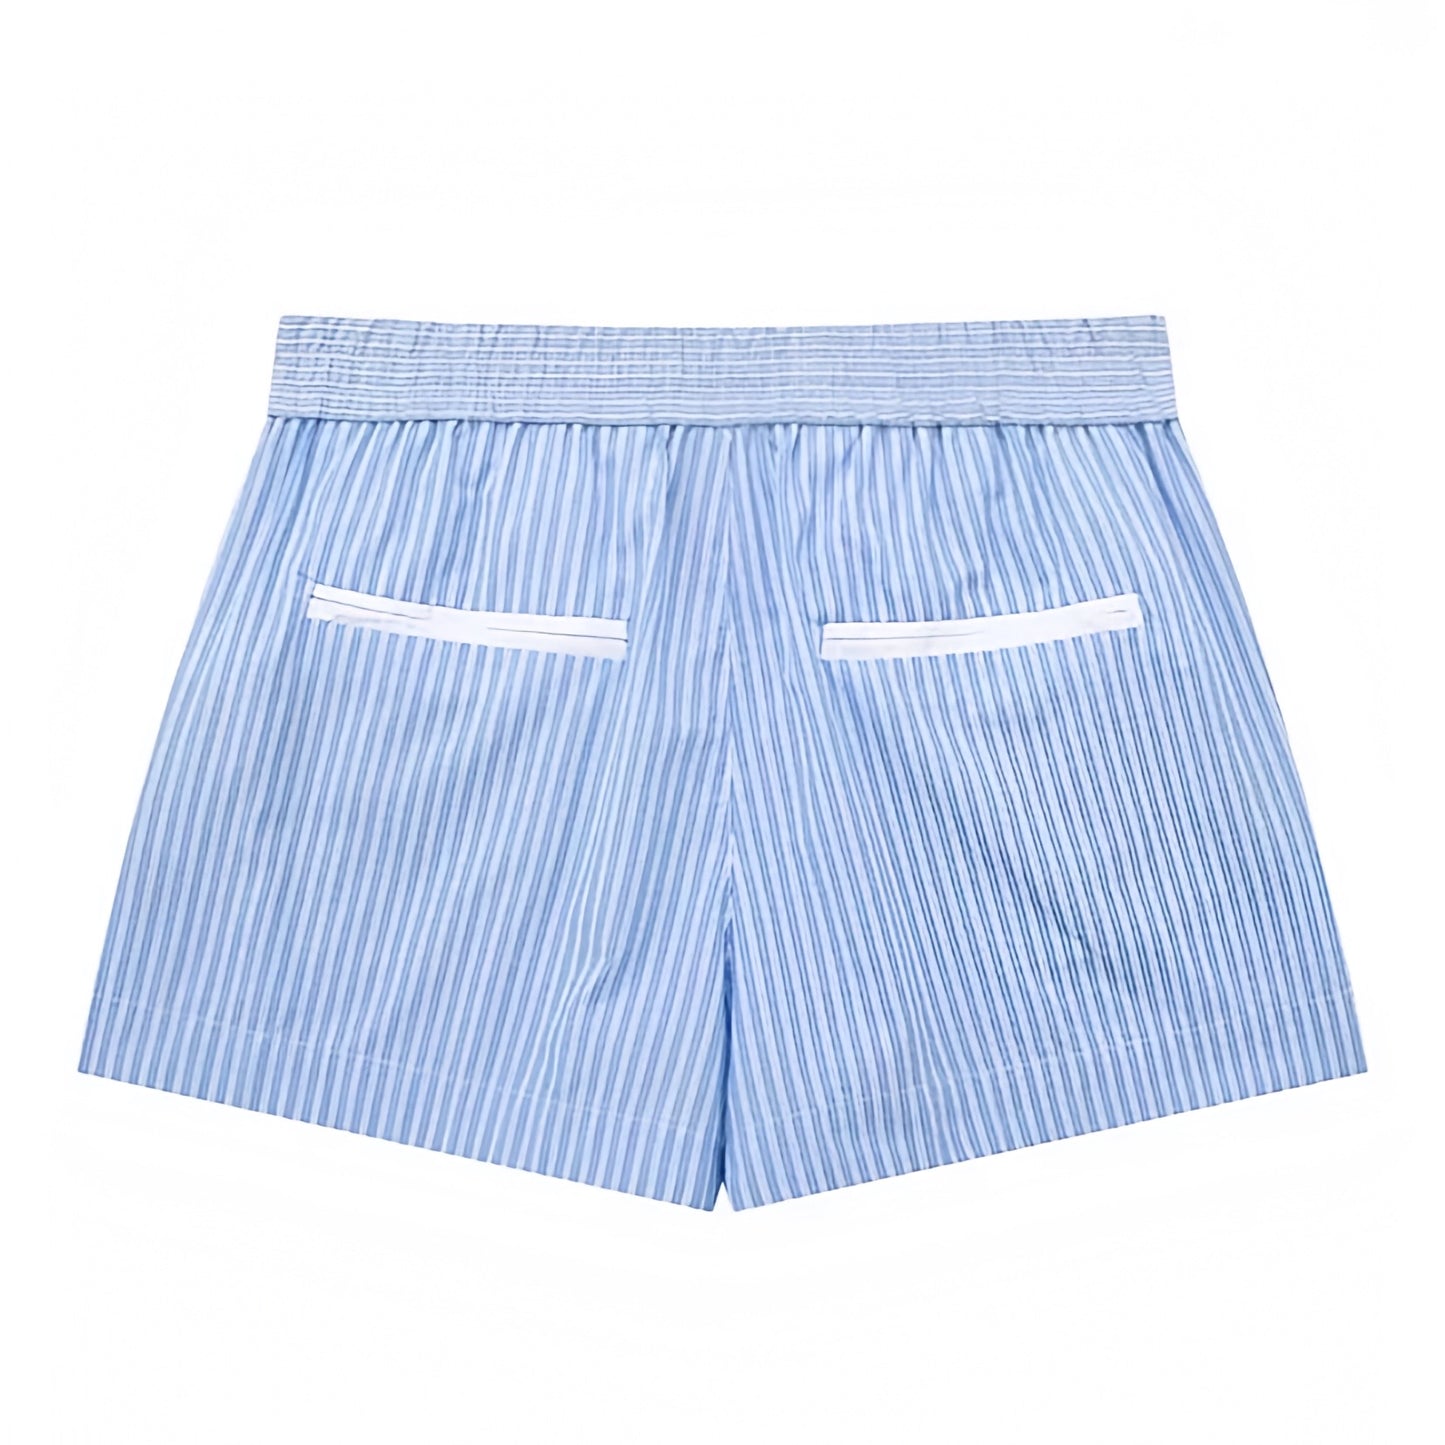 light-blue-and-white-striped-seersucker-pinstriped-patterned-fitted-waist-low-rise-waisted-cotton-linen-short-mini-sweat-shorts-with-pockets-women-ladies-chic-trendy-spring-2024-summer-elegant-casual-feminine-preppy-style-coastal-granddaughter-european-vacation-beach-wear-zara-brandy-melville-pacsun-urban-outfitters-edikted